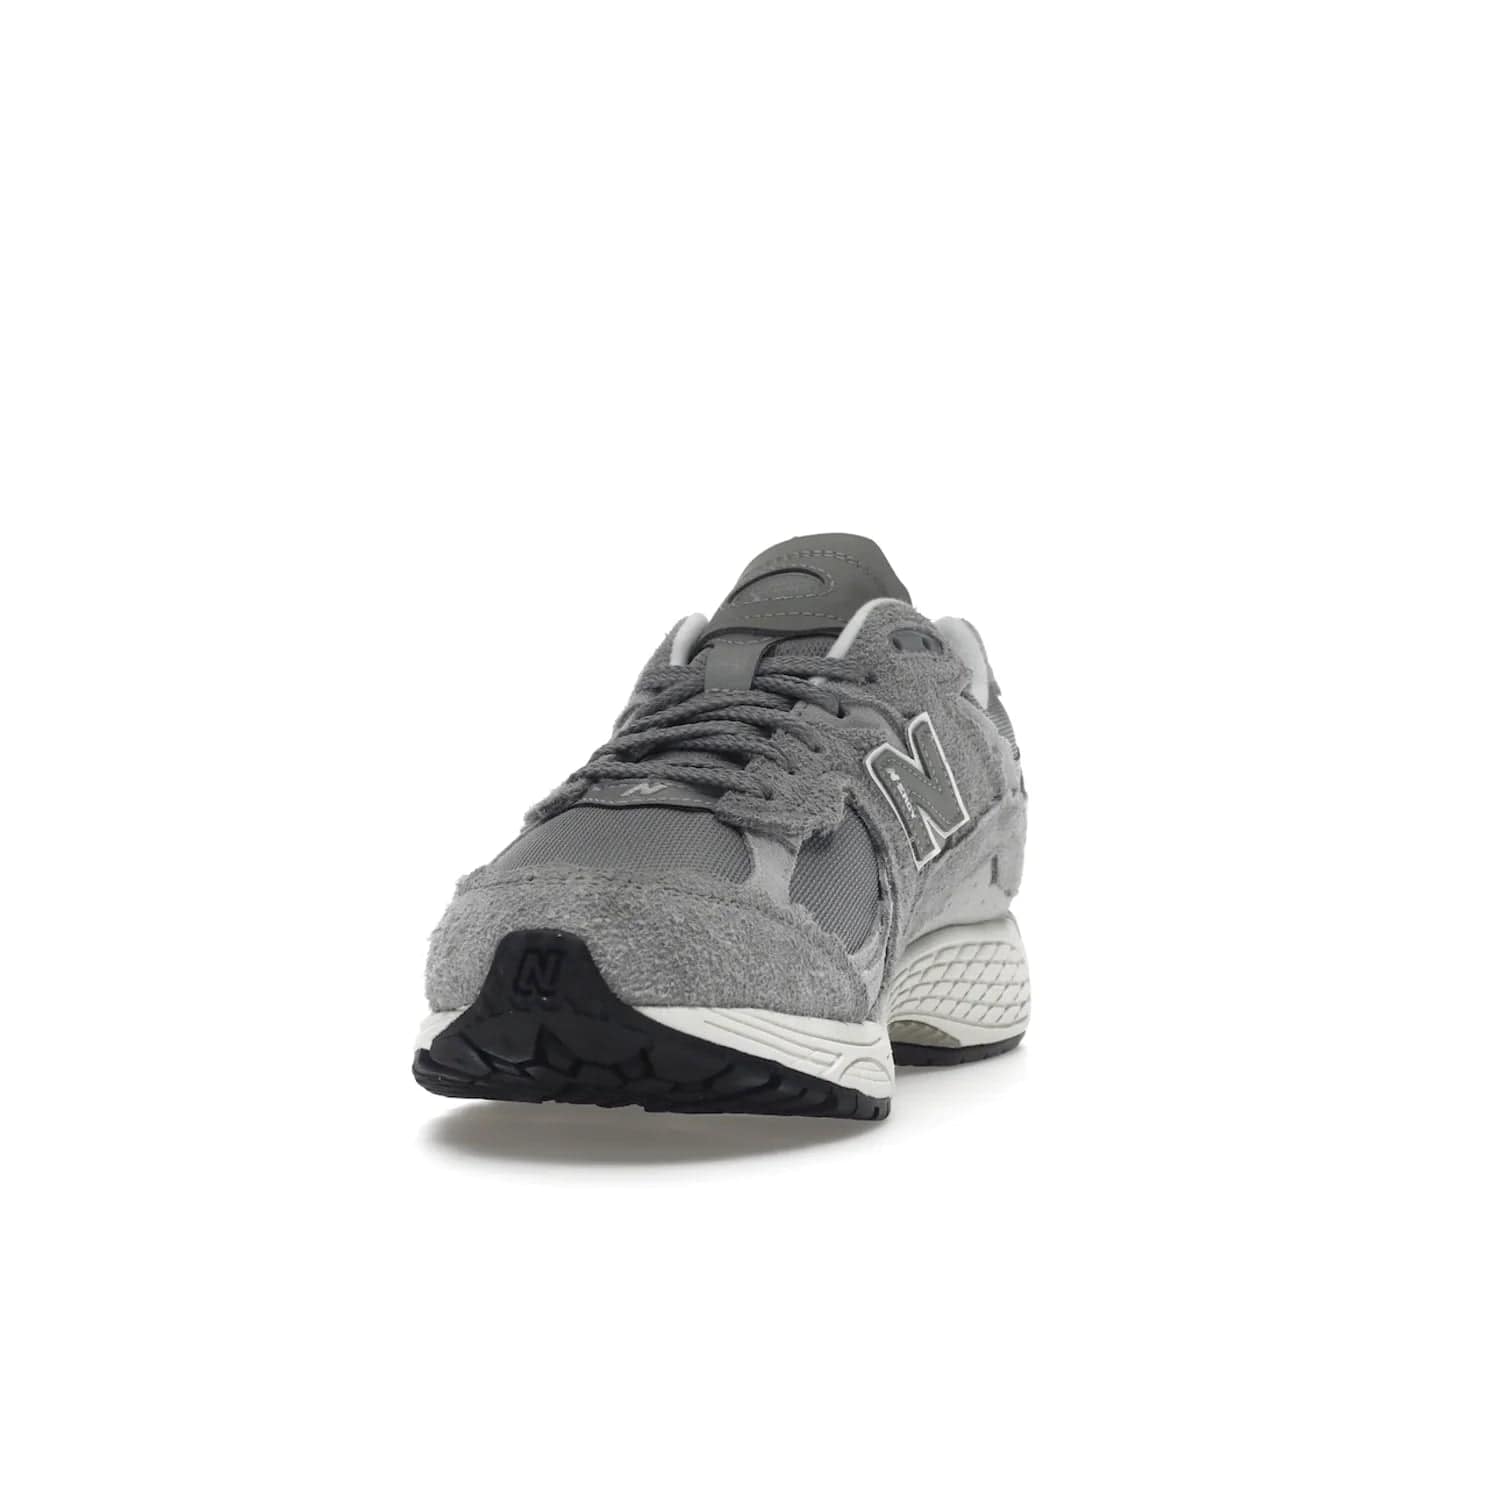 New Balance 2002R Protection Pack Grey - Image 12 - Only at www.BallersClubKickz.com - The New Balance 2002R Protection Pack Grey provides superior protection and all-day comfort. It features a blend of synthetic and mesh materials, foam midsole, rubber outsole, and a toe cap and heel counter. Show off the classic "N" logo and "2002R" lettering. Get a pair on February 14, 2023 for protection and style.